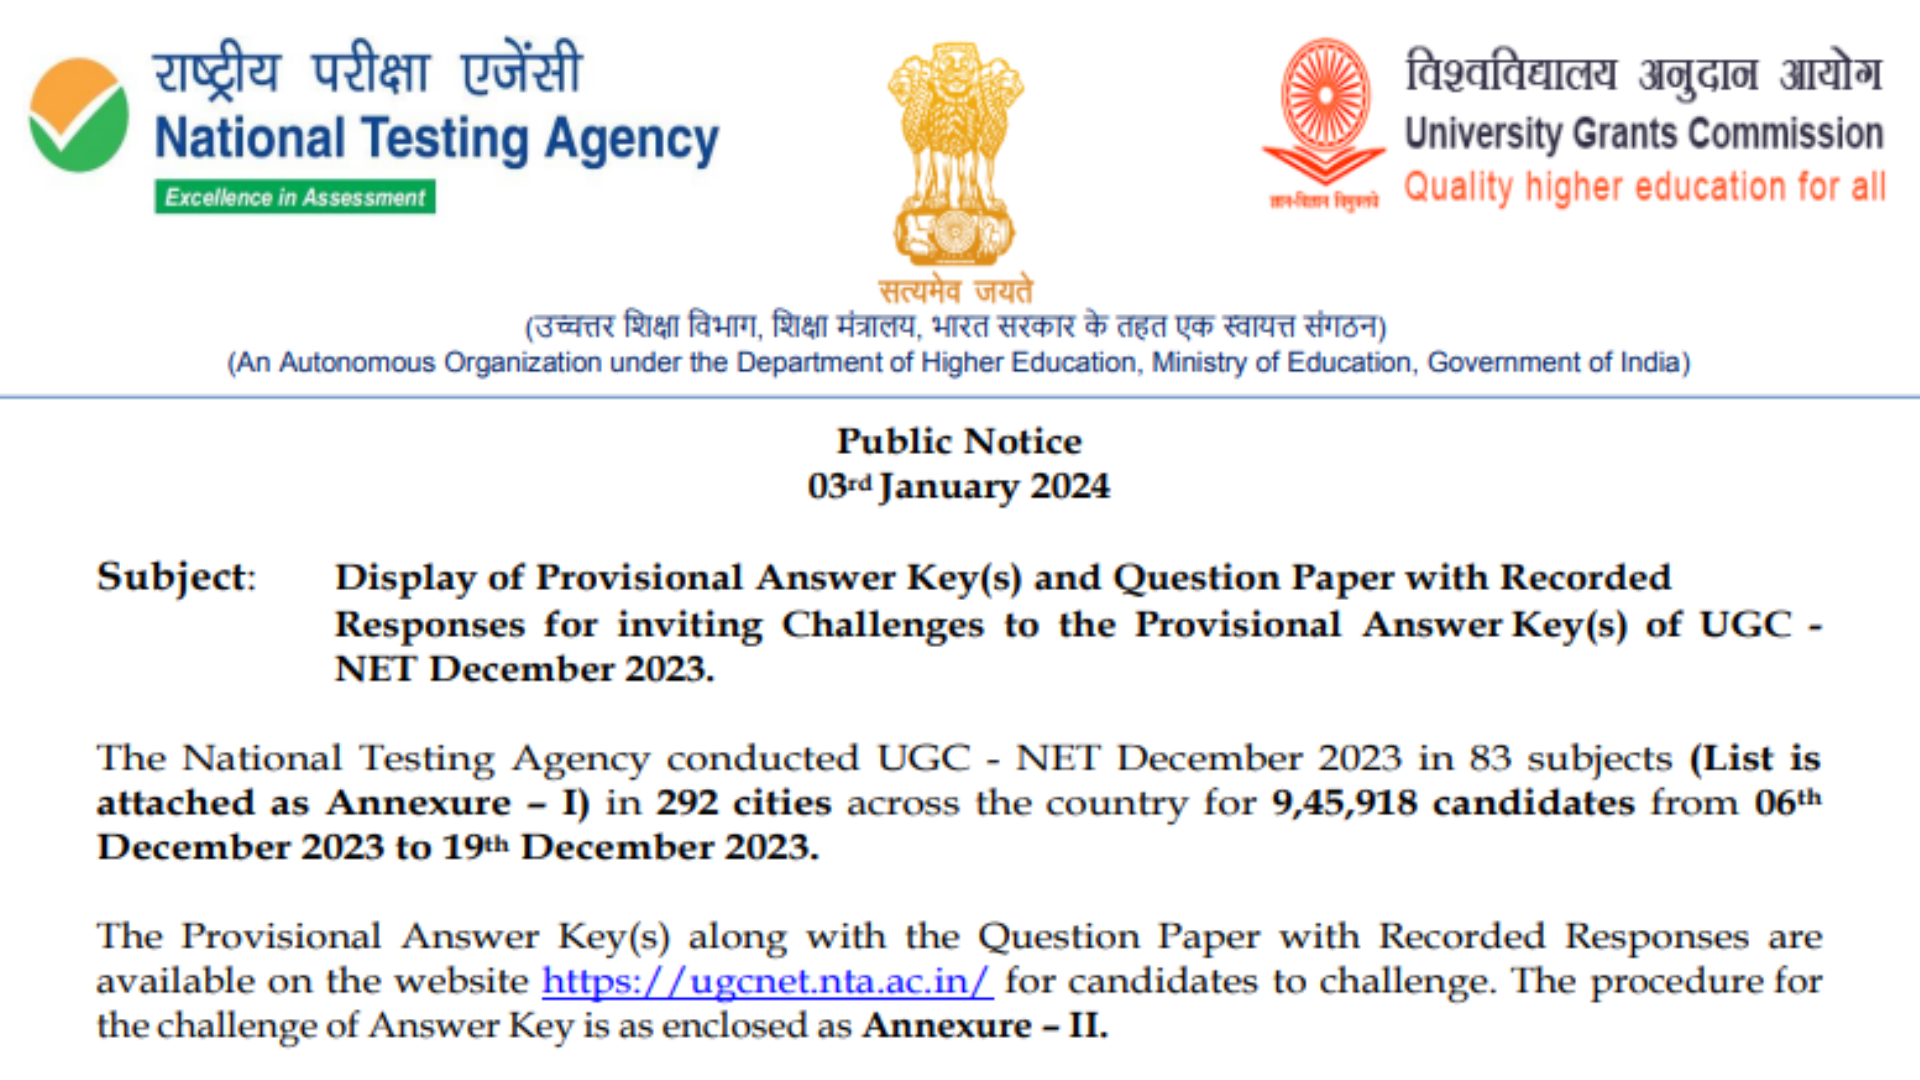 UGC NET / JRF December 2023 Exam Result with Score Card 2024